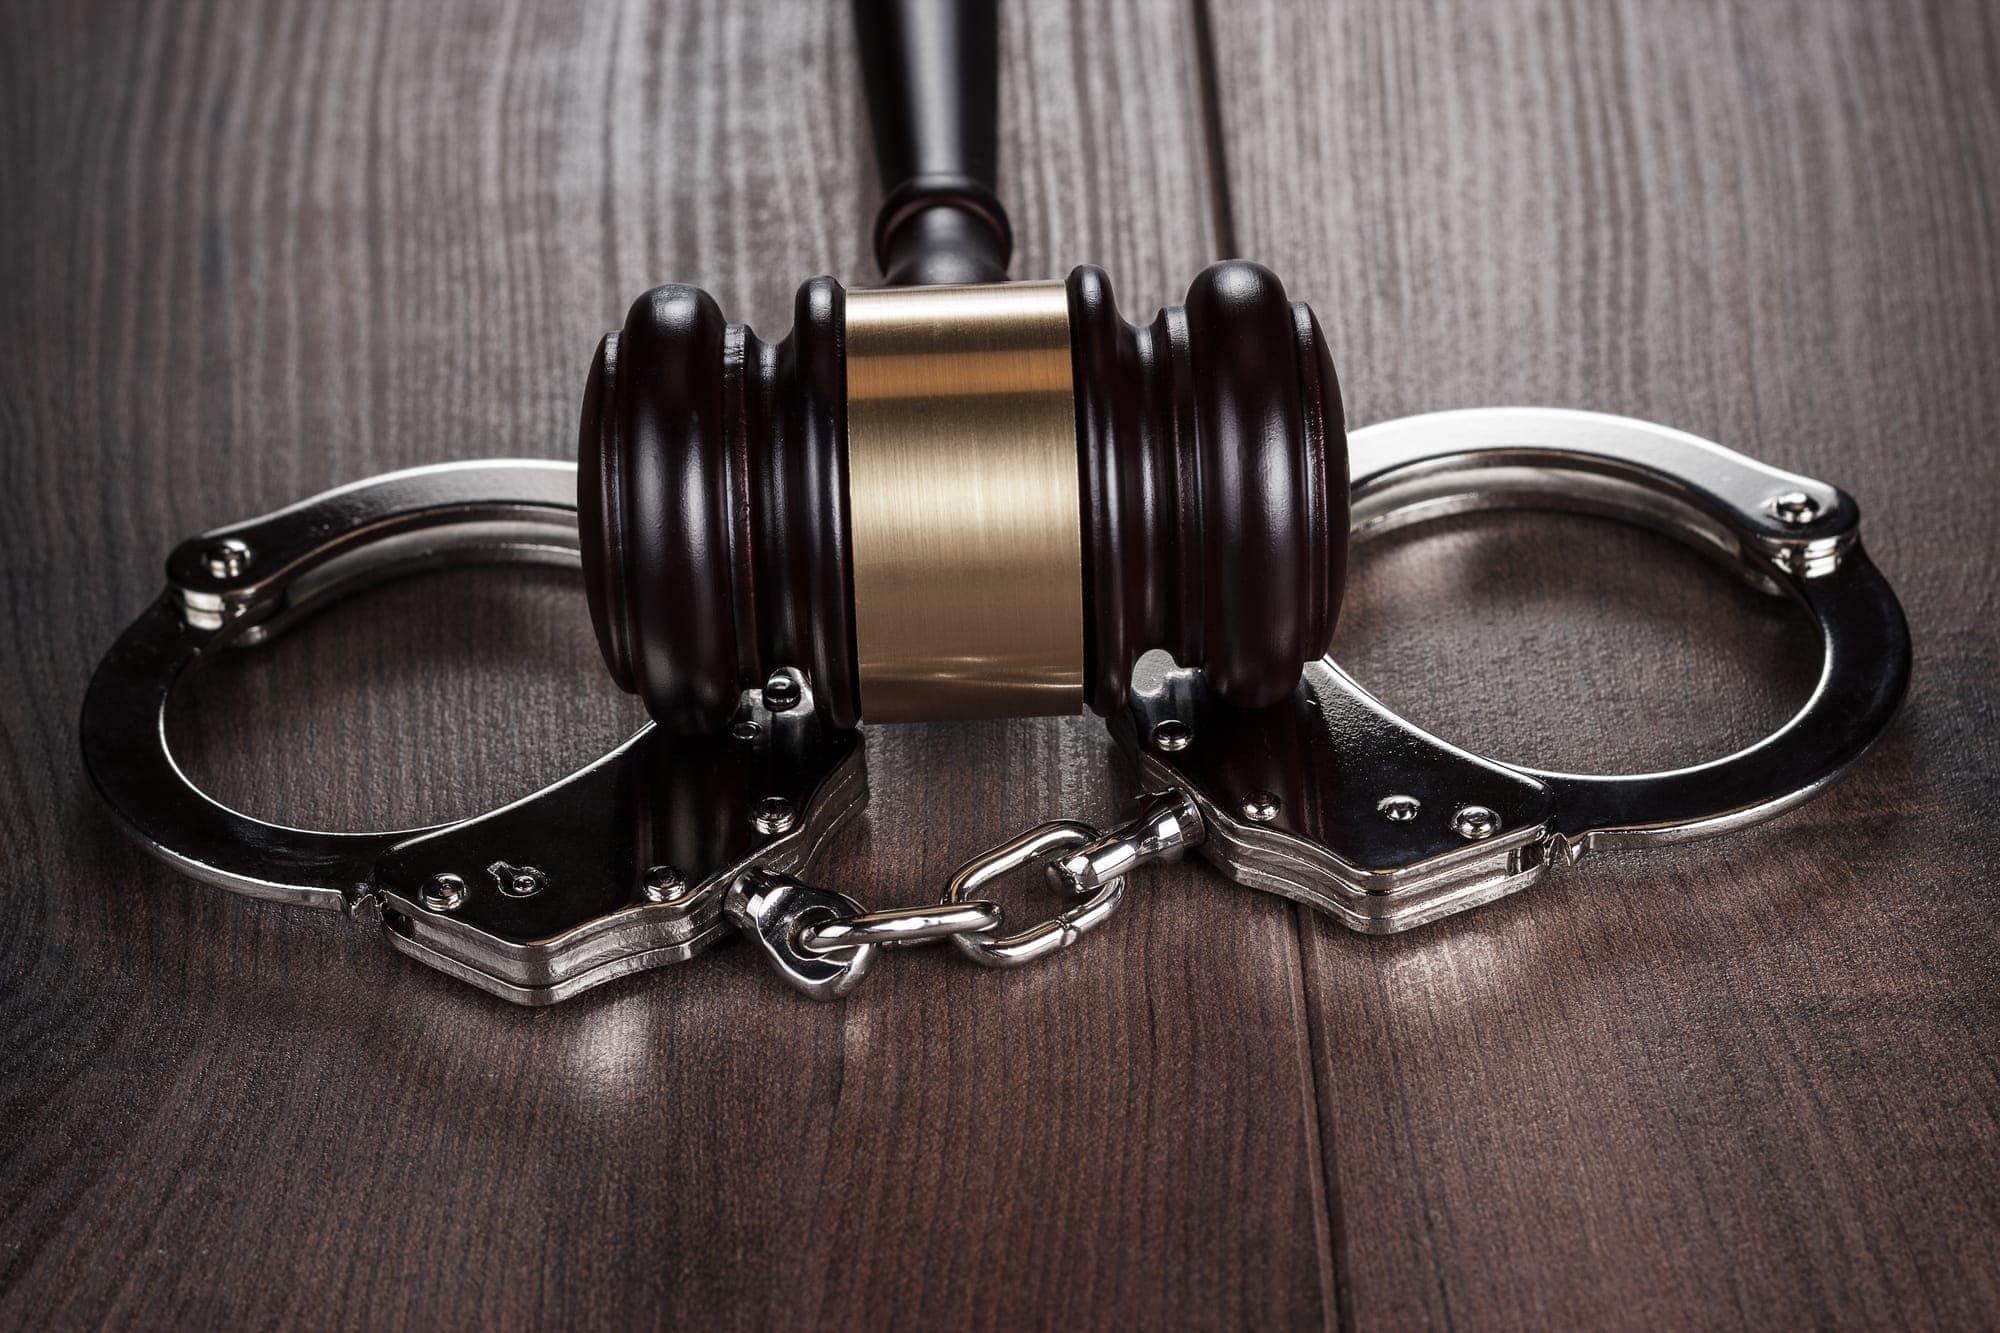 handcuffs and judge gavel on brown wooden table background